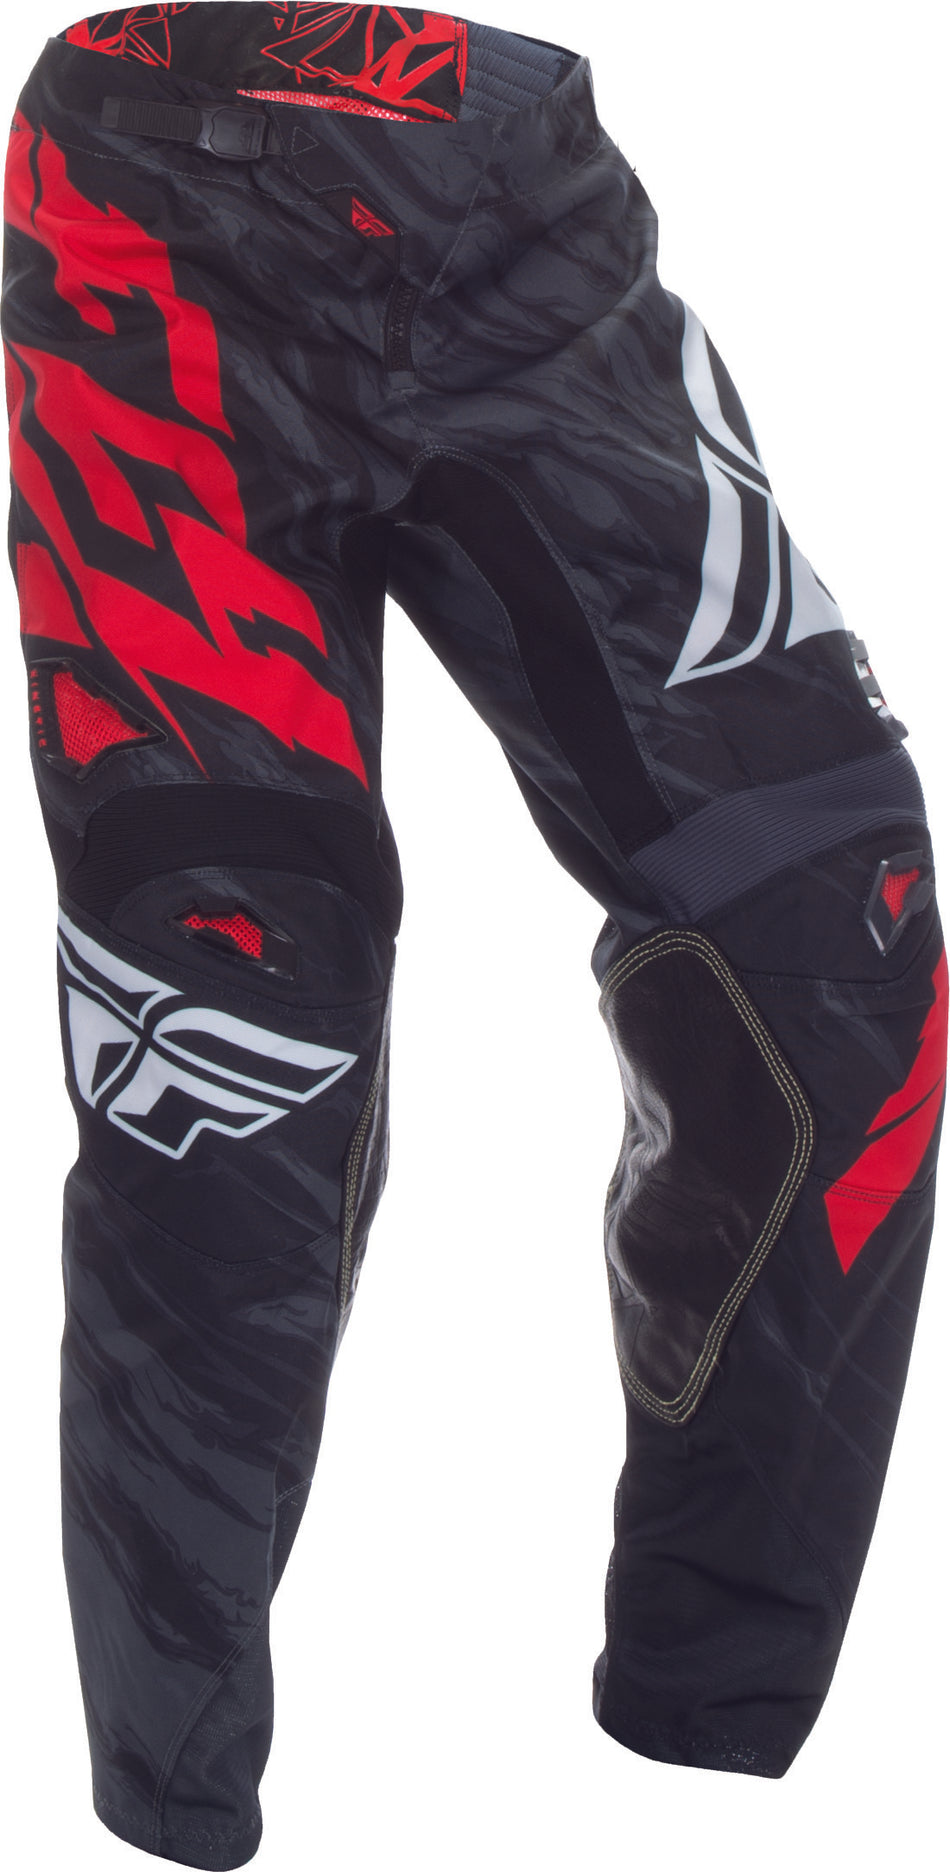 FLY RACING Kinetic Relapse Pant Black/Red Sz 28s 370-43028S